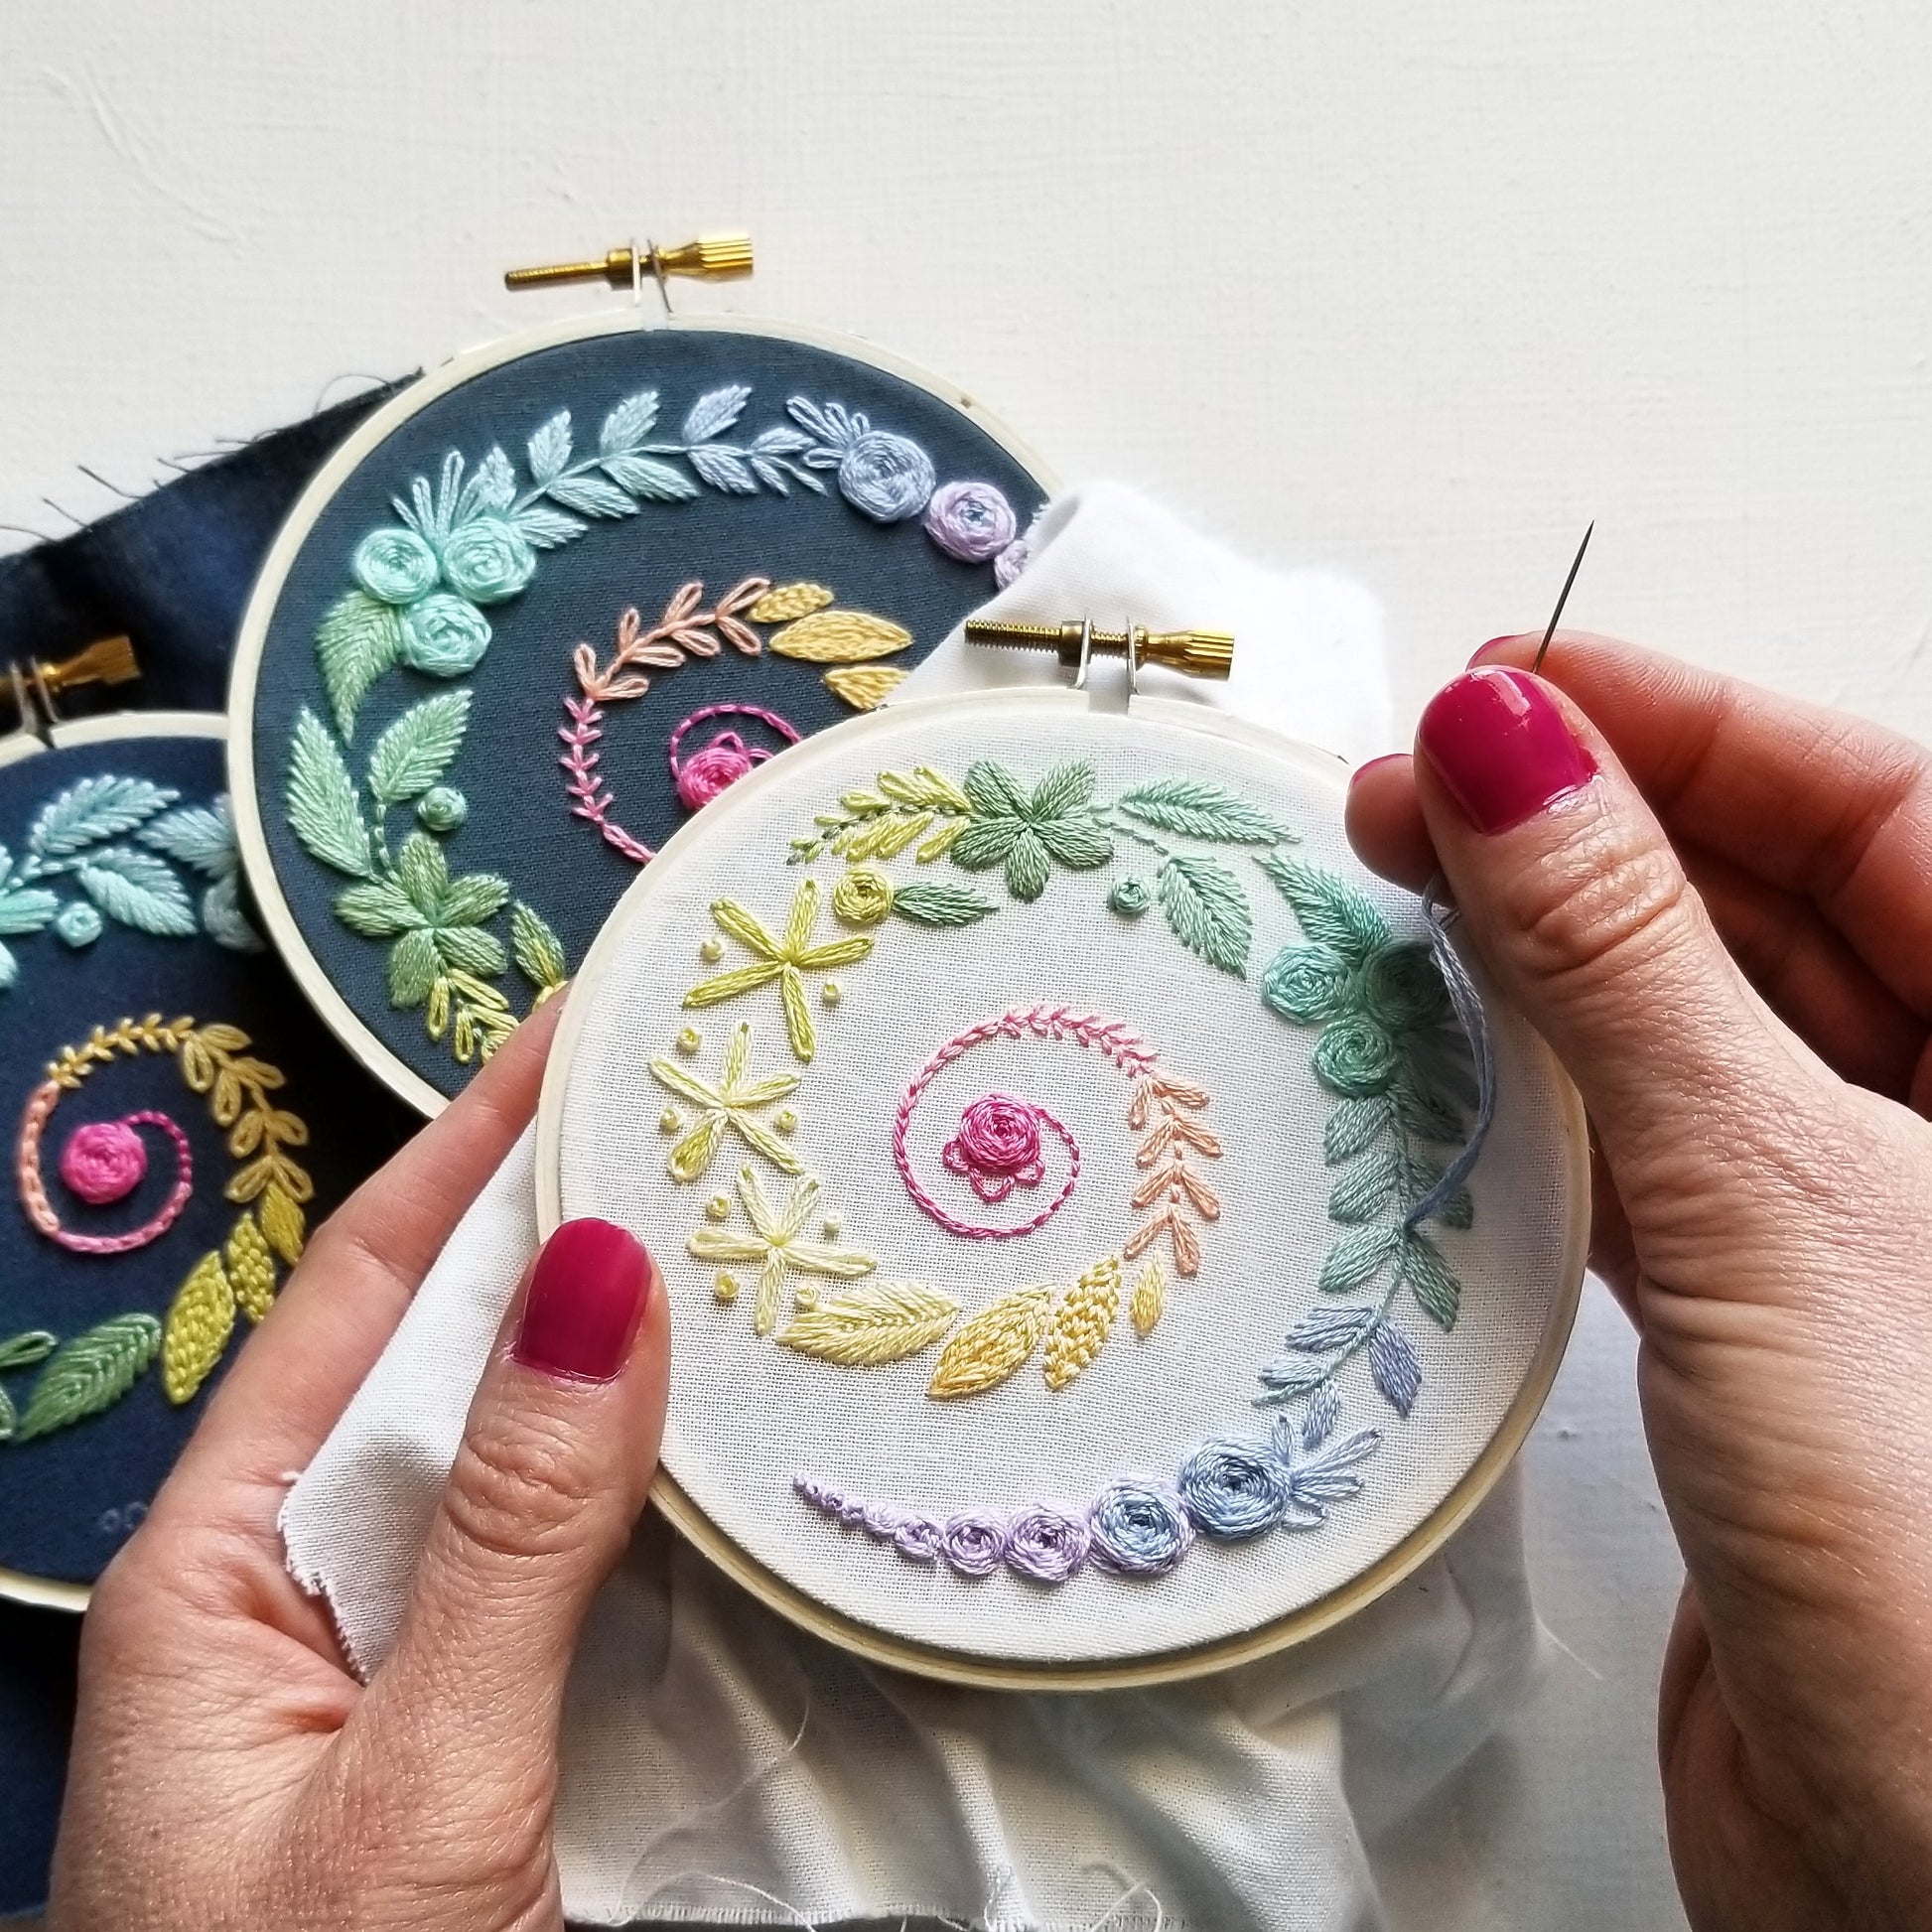 Hand Embroidery for Complete Beginners: Every Stitches Beginners